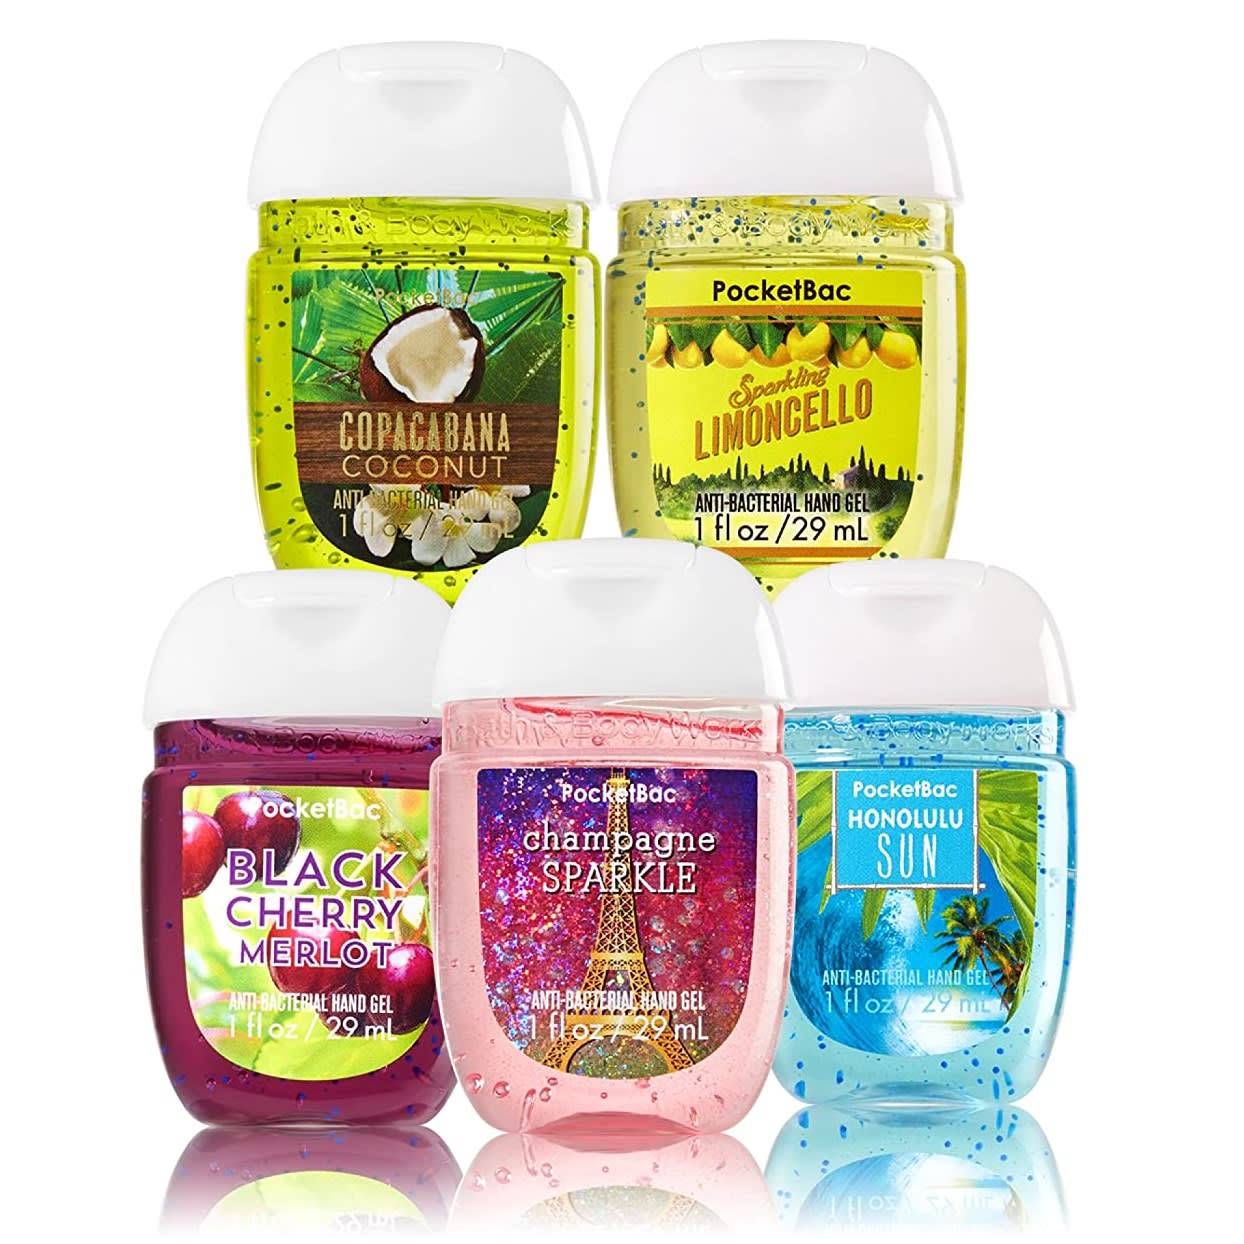 Bath & Body Works Pocketbac Hand Sanitizer Scented Gel-review-singapore